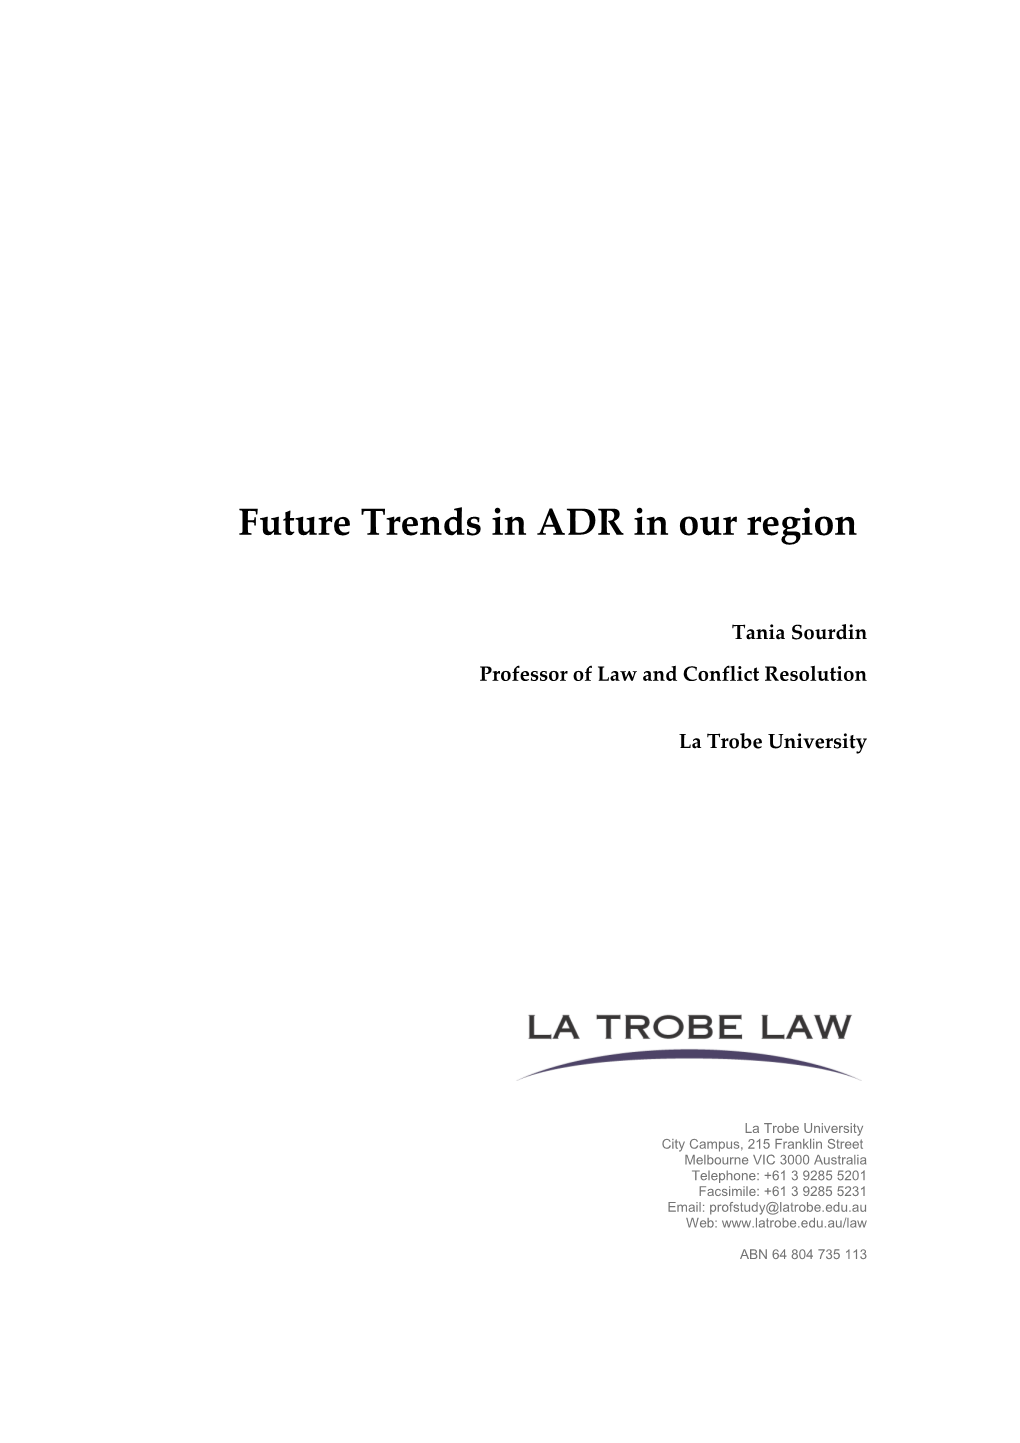 Future Trends in ADR in Our Region